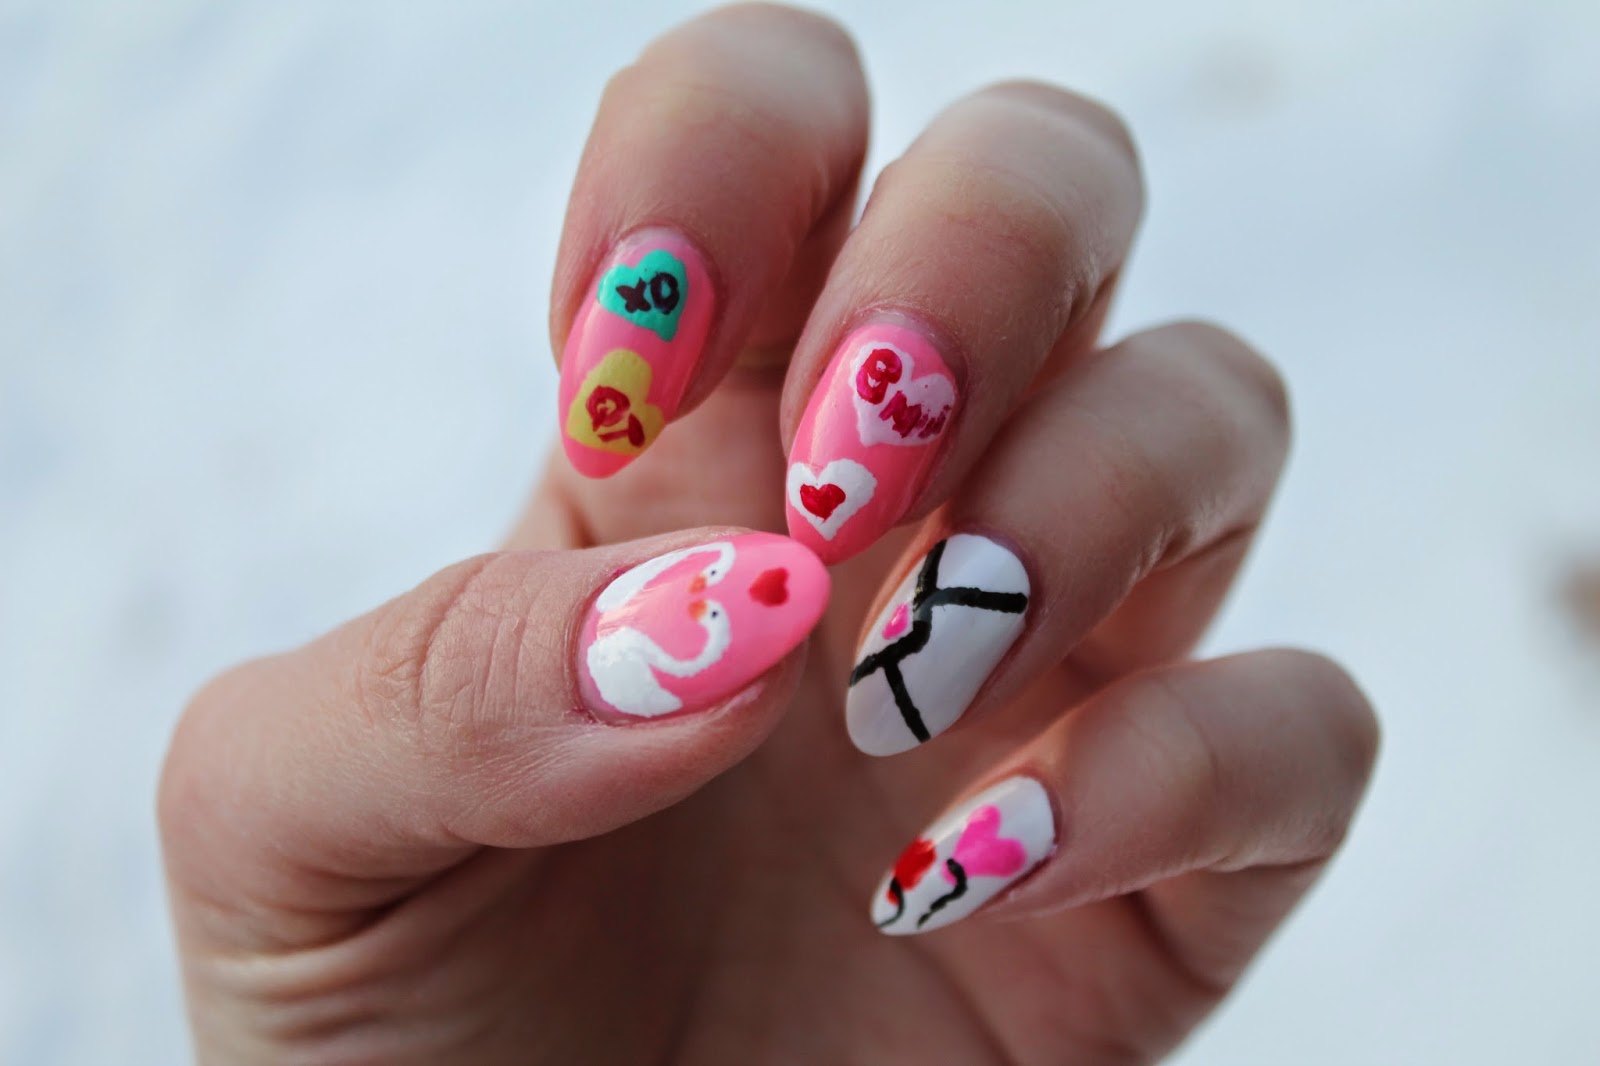 4. Heart Nail Art Designs for Valentine's Day - wide 3